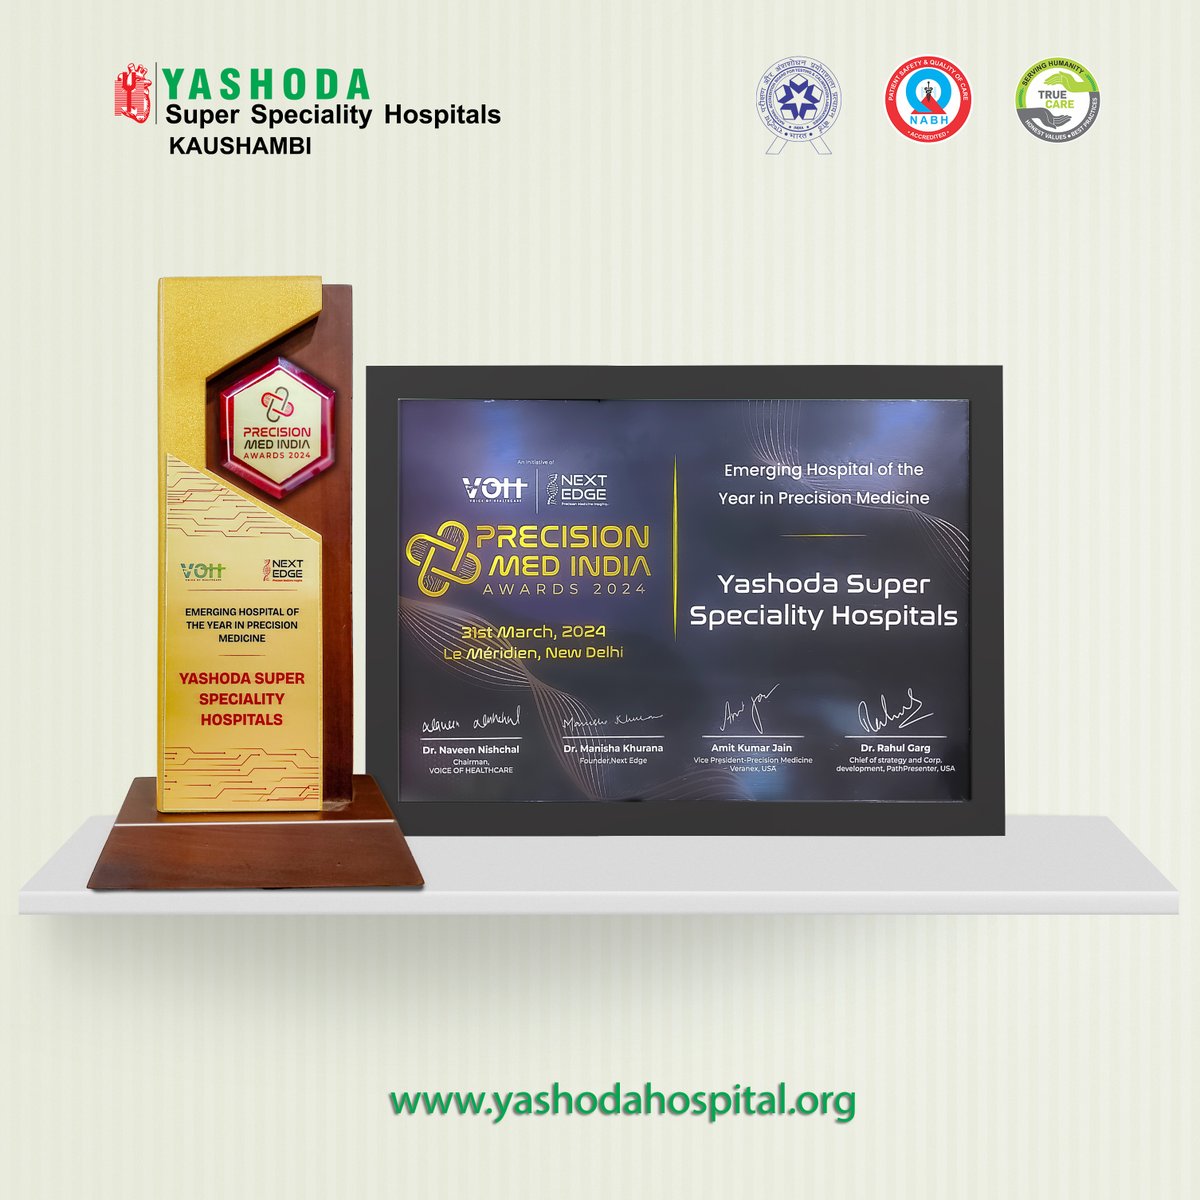 Celebrating Success! Recently, #YashodaHospital was named 'Emerging Hospital of the Year 2024 in #PrecisionMedicine' & Dr. Abhishek Yadav won 'Emerging Precision #Oncologist of the Year' at Precision Med India Conclave. Proud of our team's dedication to advancing healthcare!